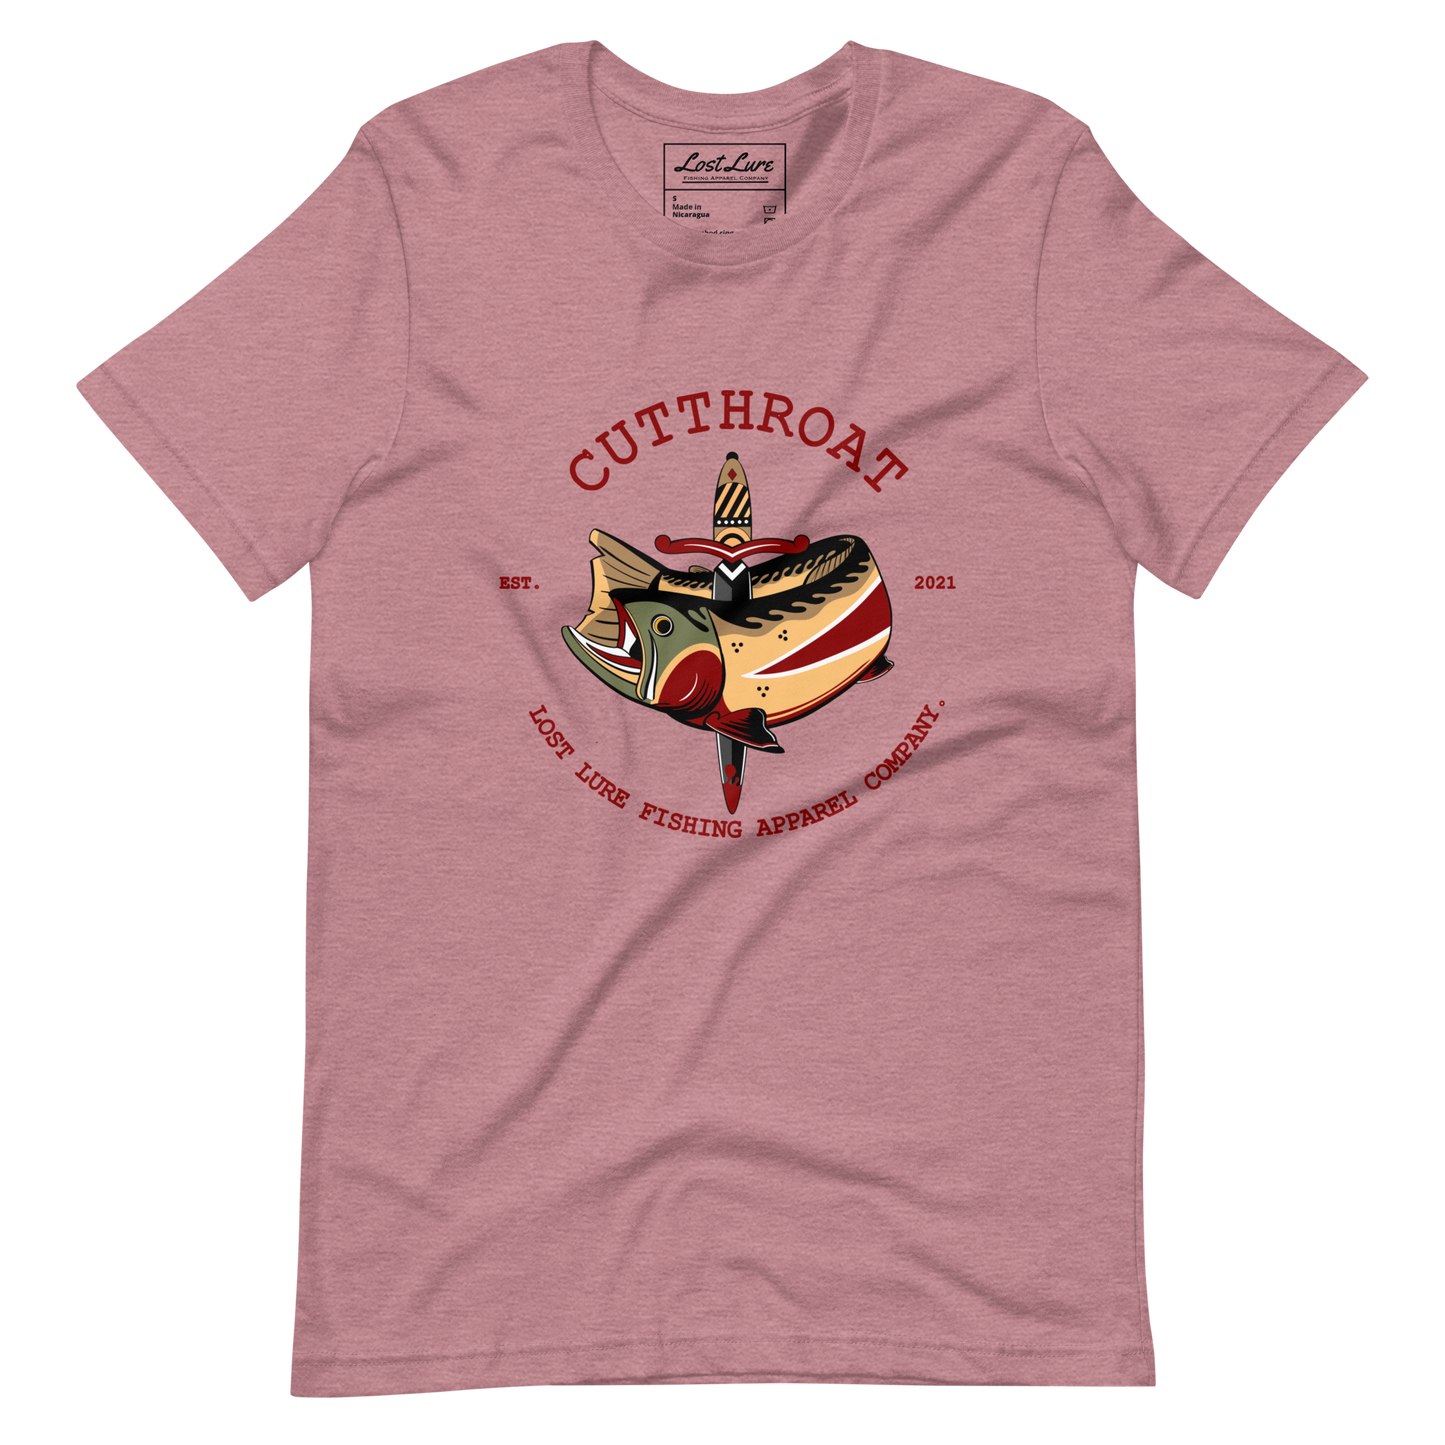 Cutthroat Trout fishing shirt. It’s an American traditional style design with a cutthroat trout and a dagger. The shirt reads Cutthroat trout, est. 2021, lost lure fishing apparel company. The fishing design is on the front of the shirt. Salmon colored fishing shirt